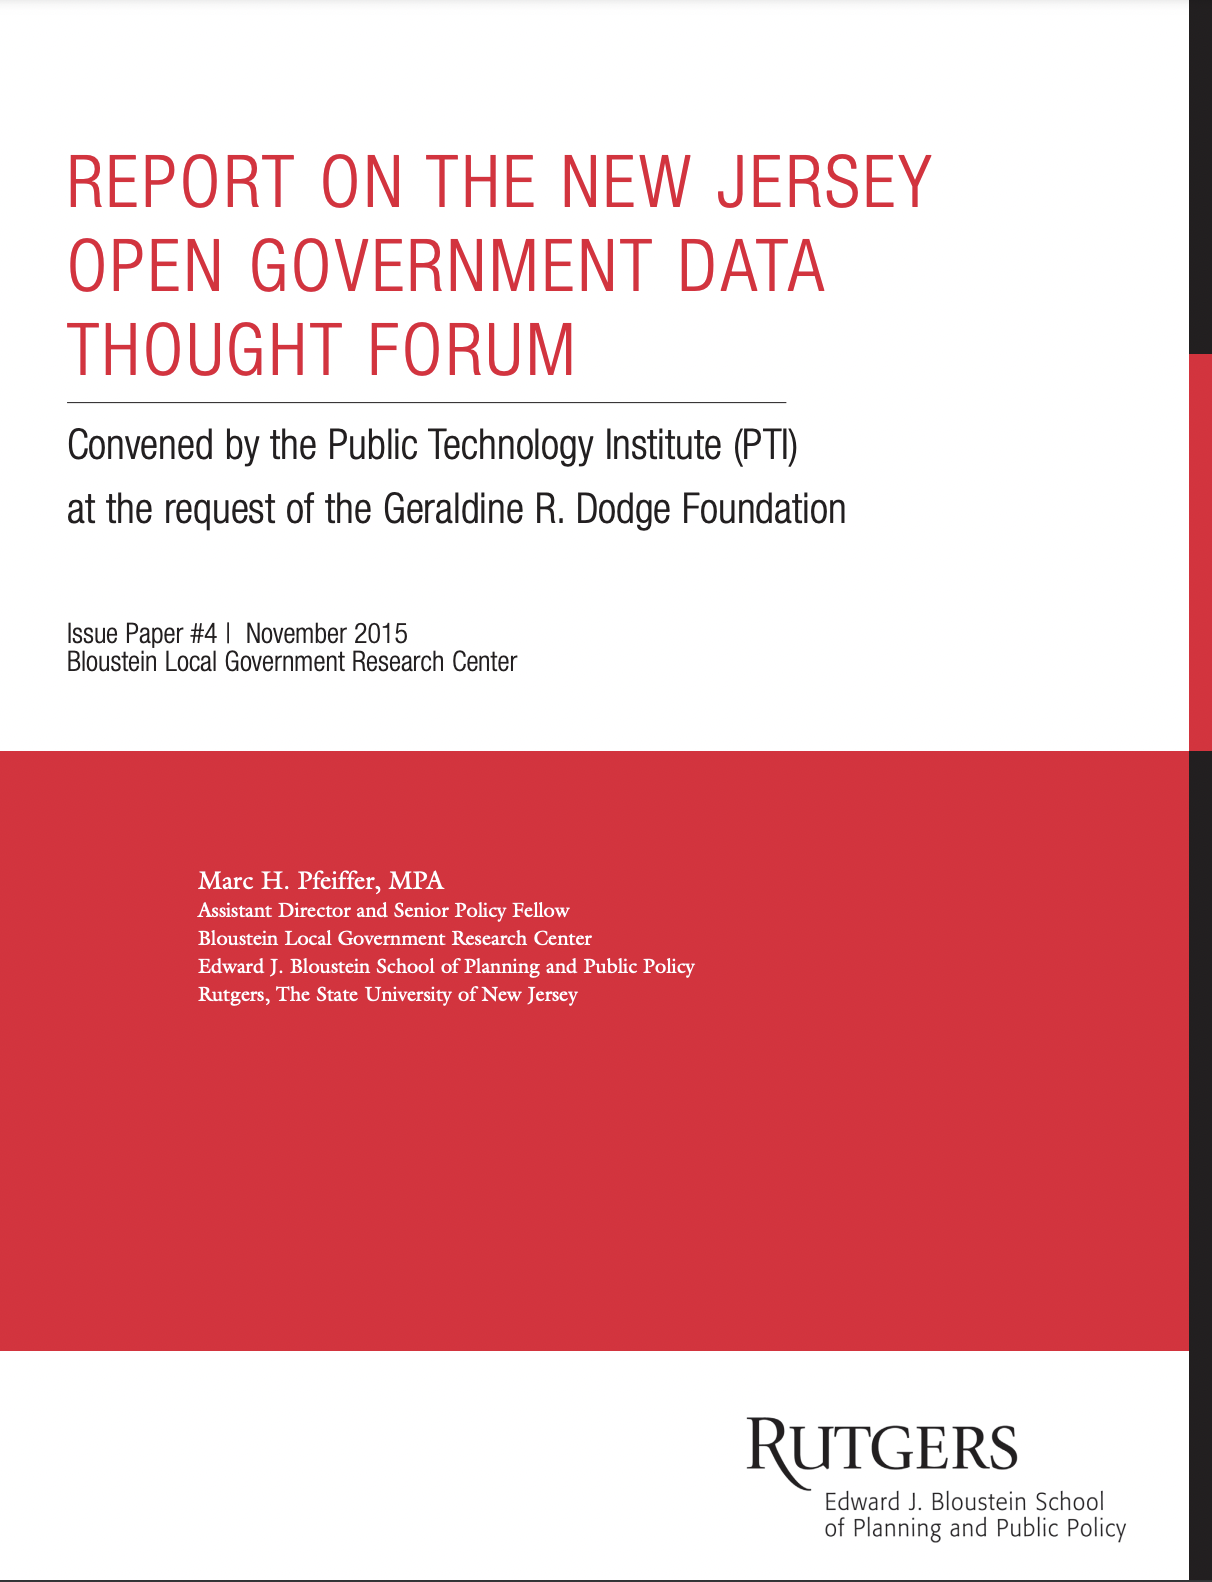 Report on the New Jersey Open Government Data Thought Forum